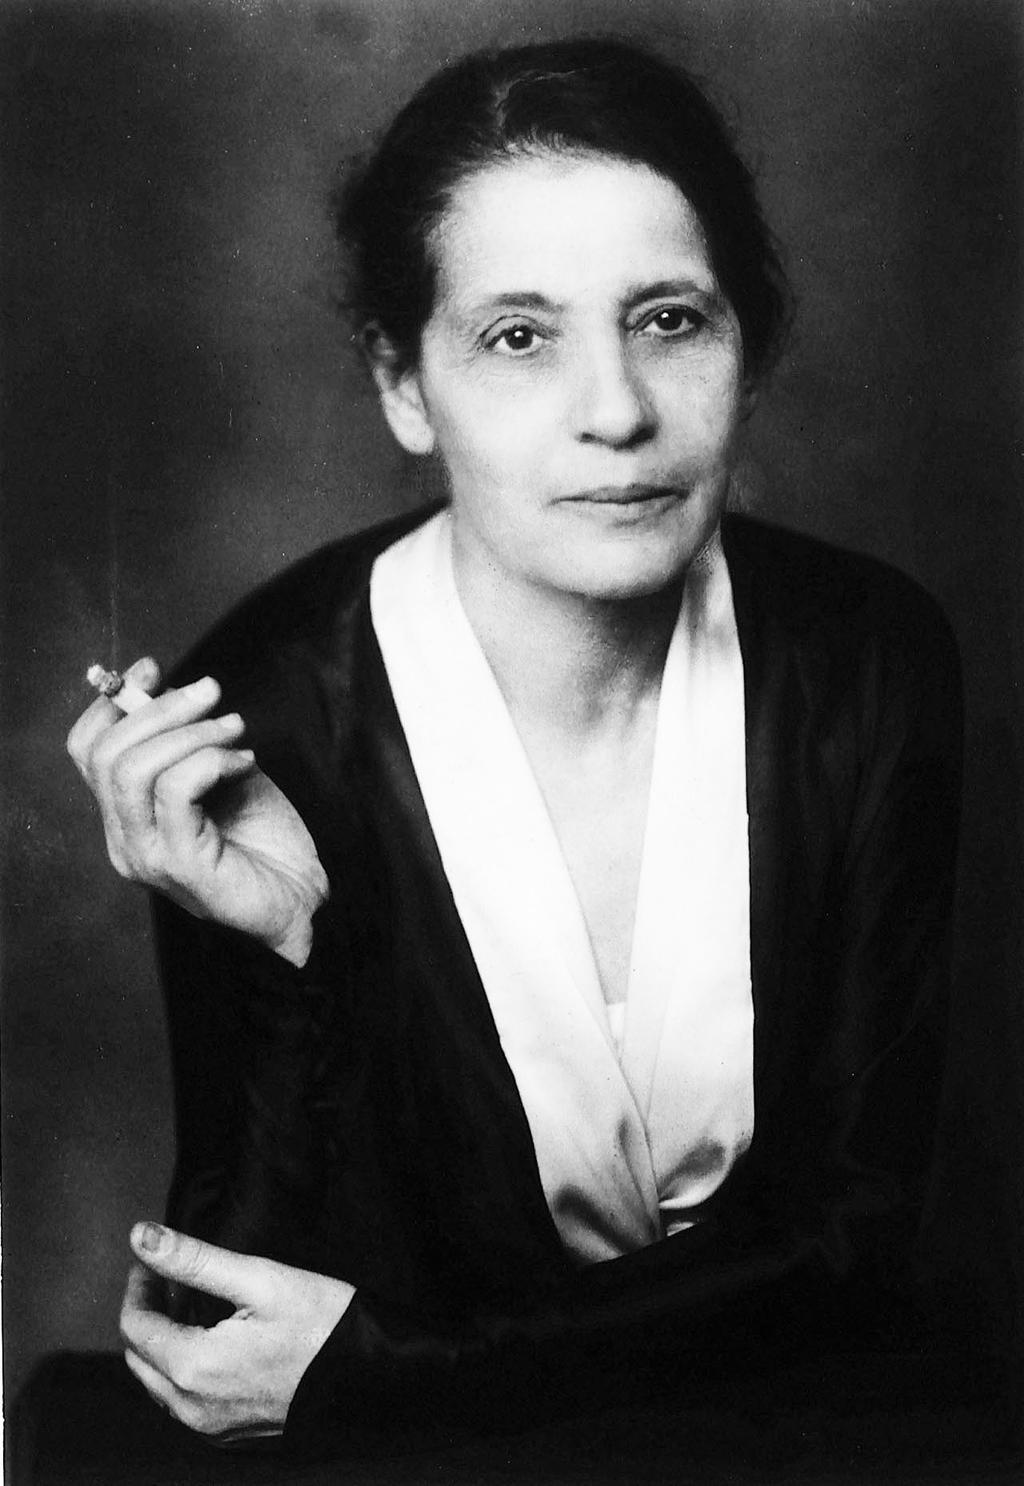 Fission of uranium discovered by Lise Meitner from Otto Hahn s data in